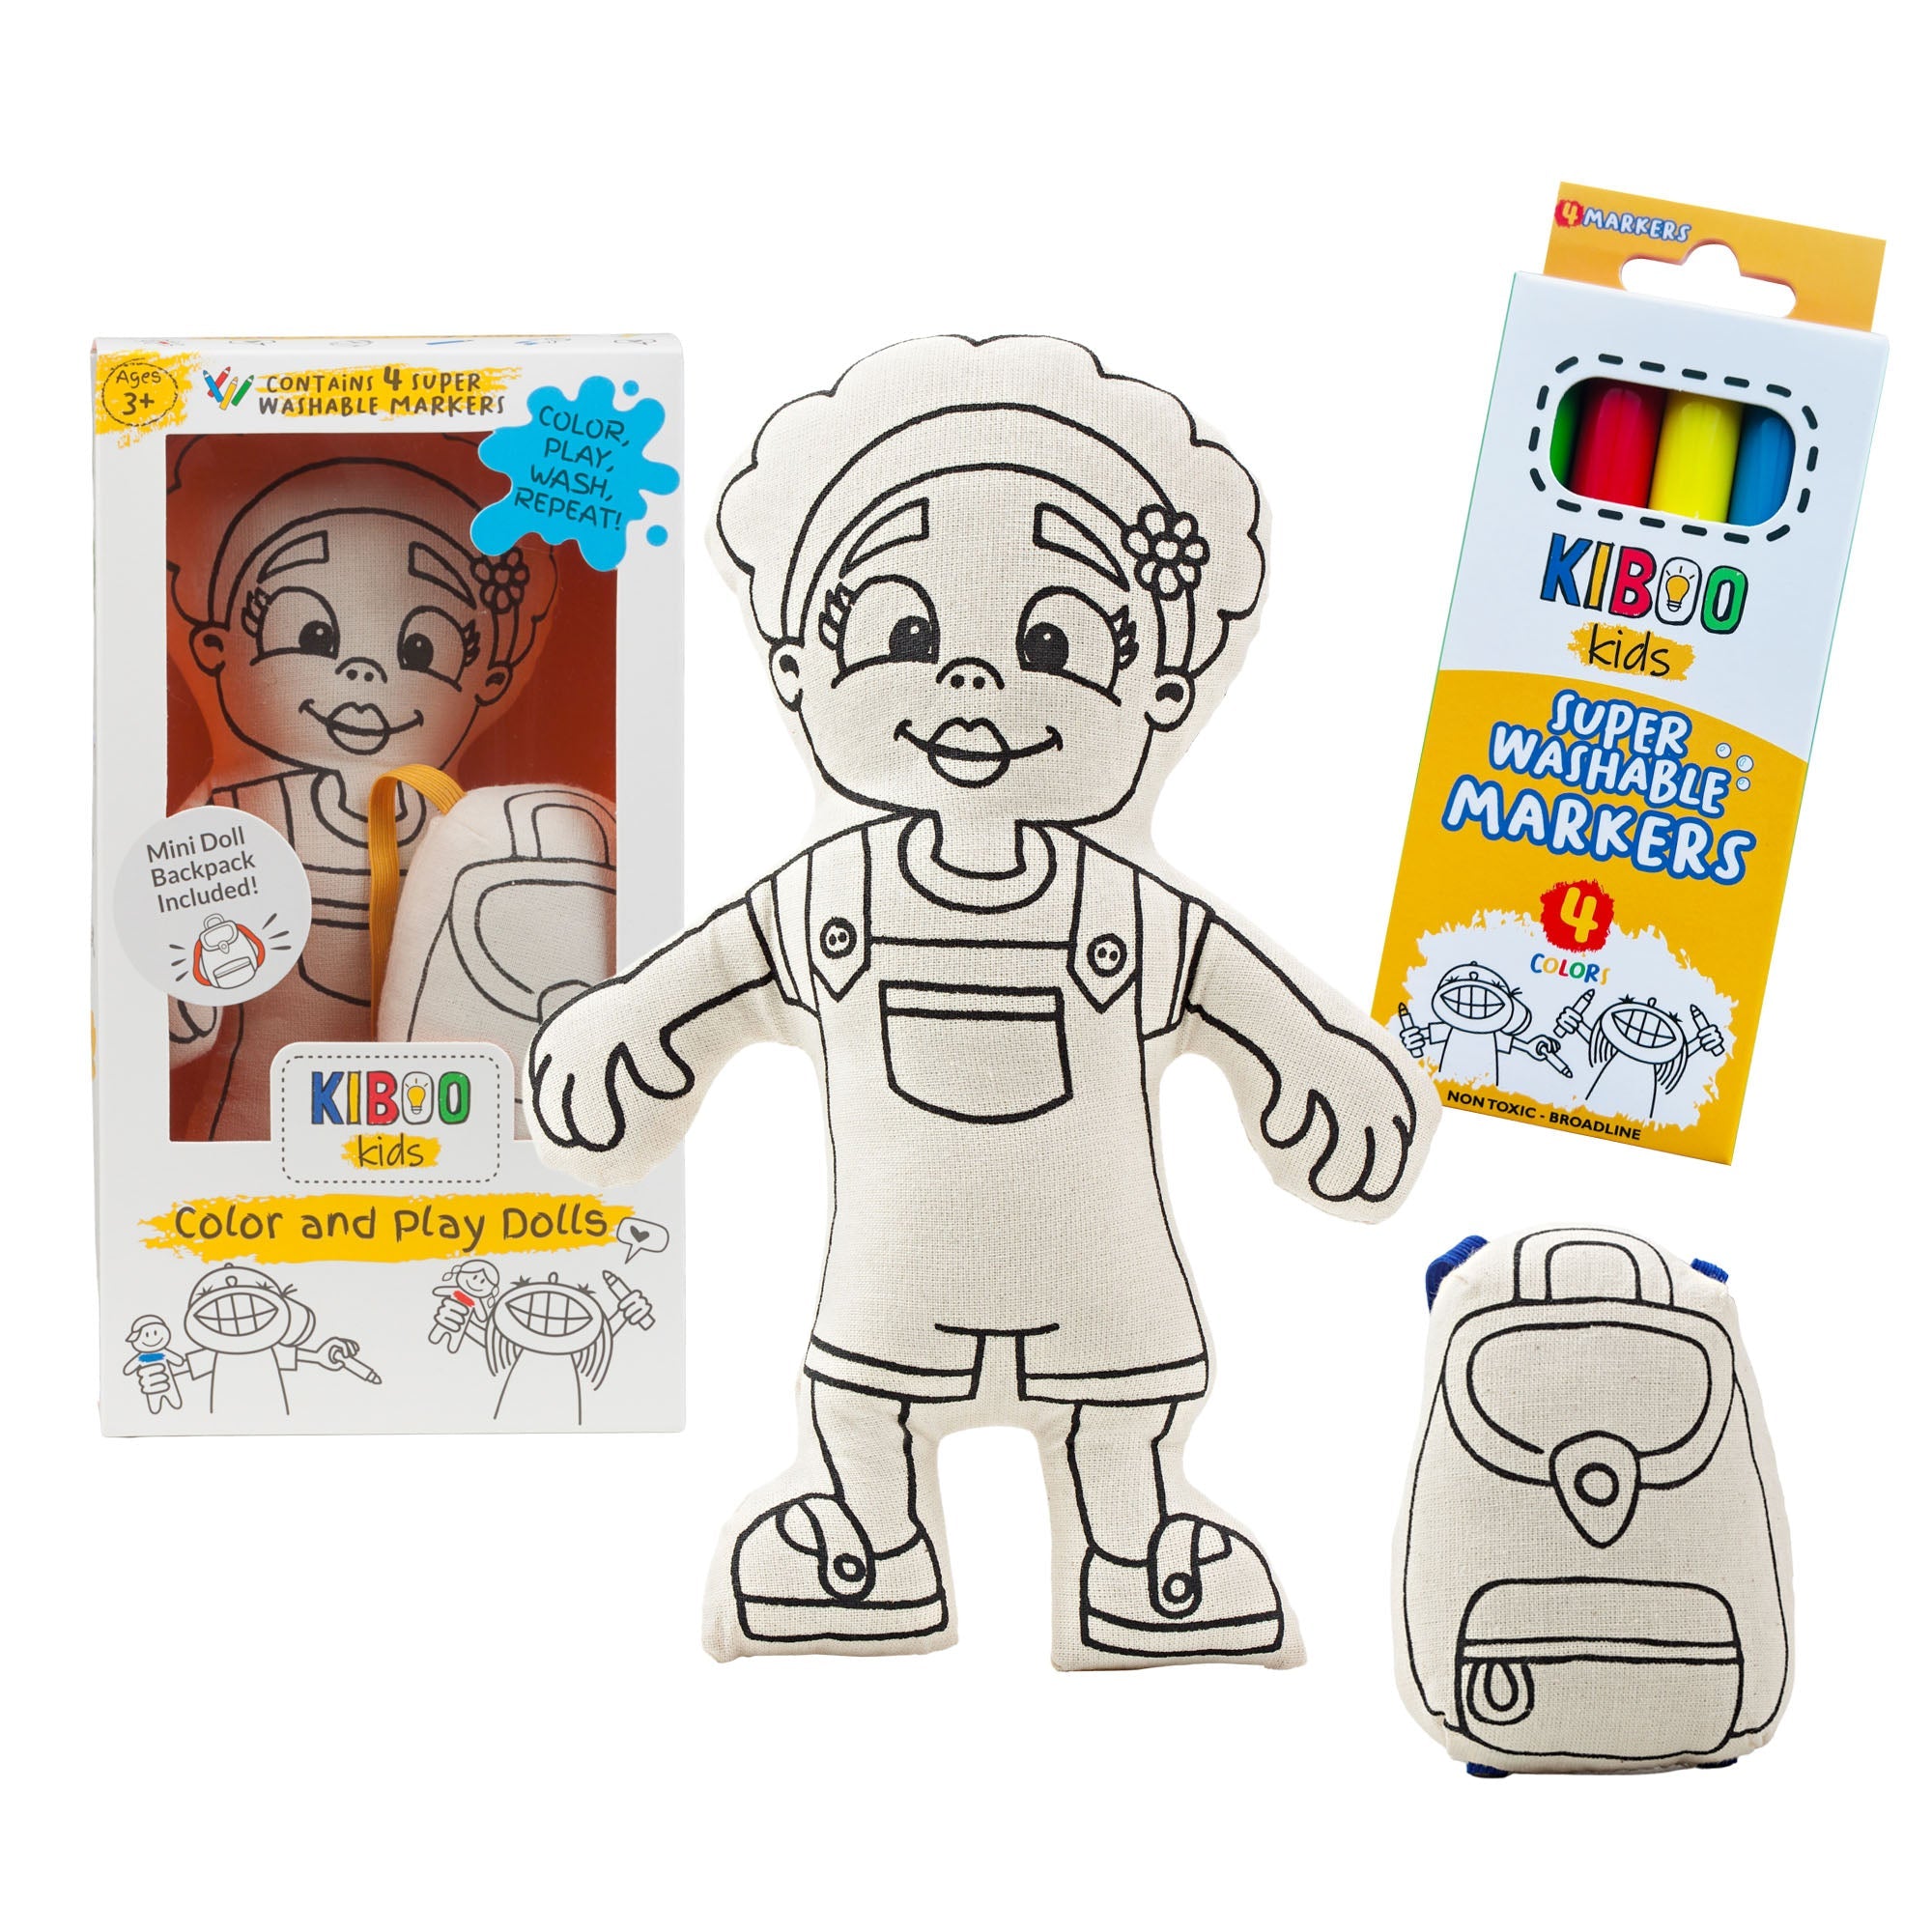 Kiboo Kids: Girl With Flower Headband - Colorable And Washable Doll For Creative Play